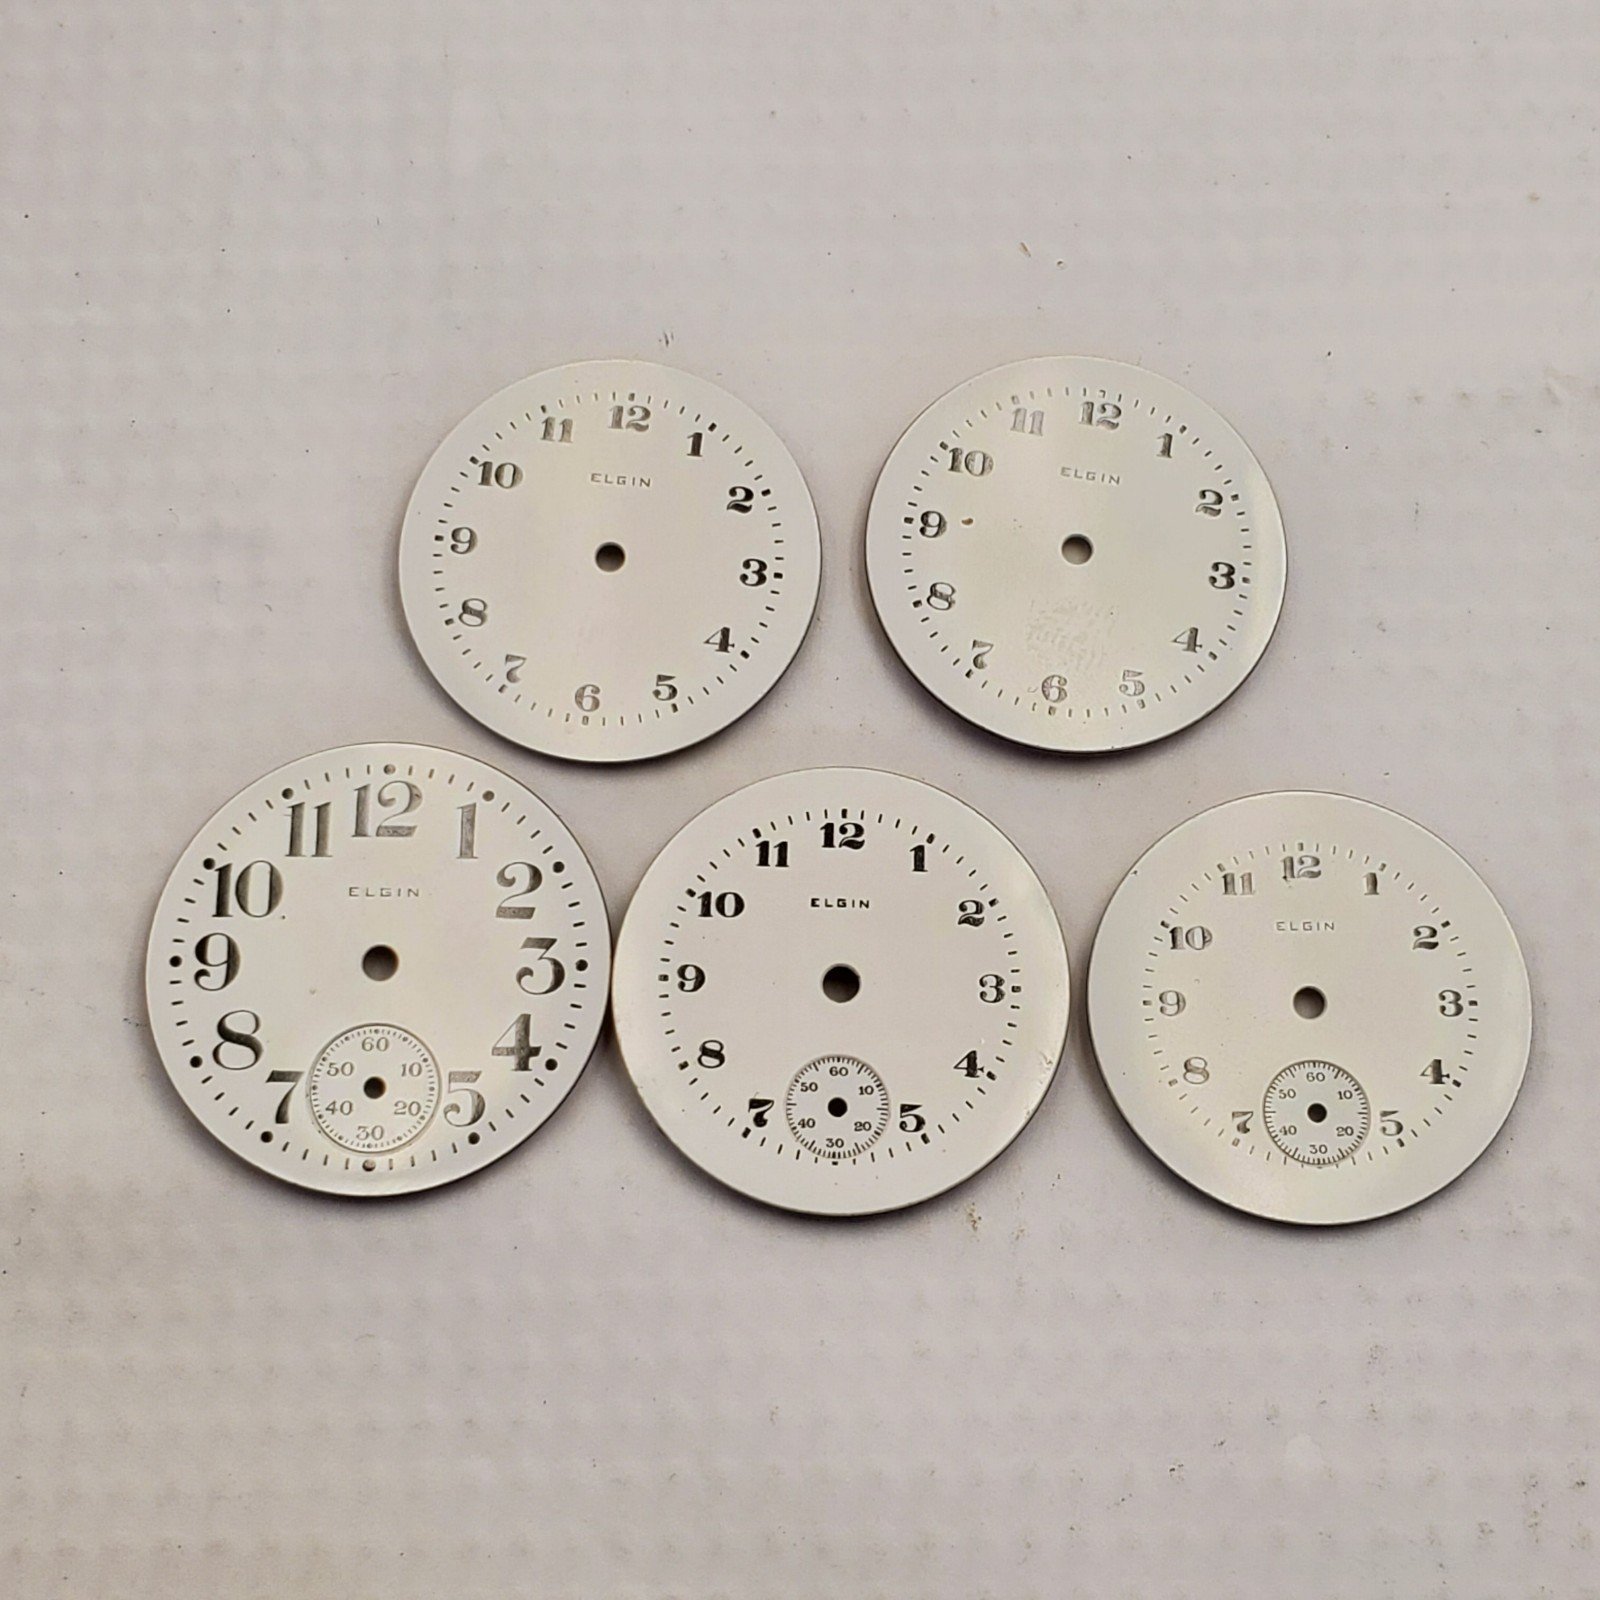 LOT OF 5 VINTAGE ELGIN WATCH WHITE BLACK DIALS SWISS NEVER BEEN USED BEFORE eCMK5svlw